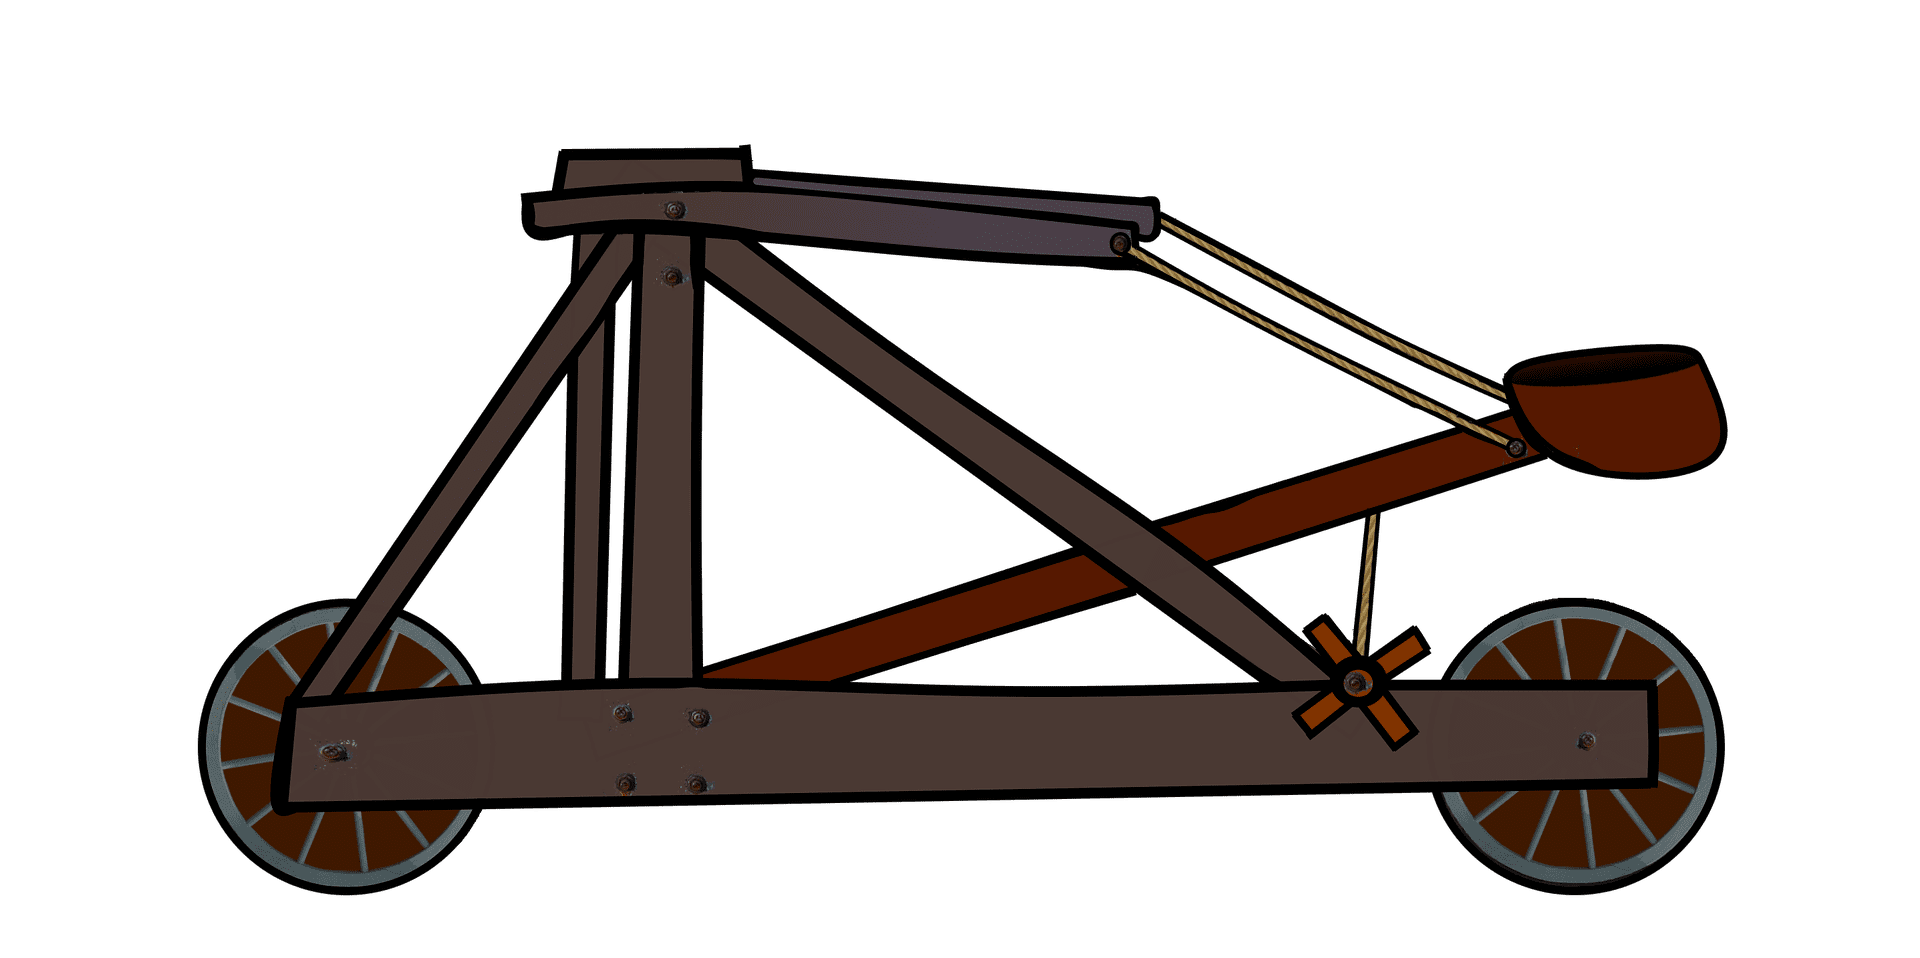 an illustration of a classic catapult